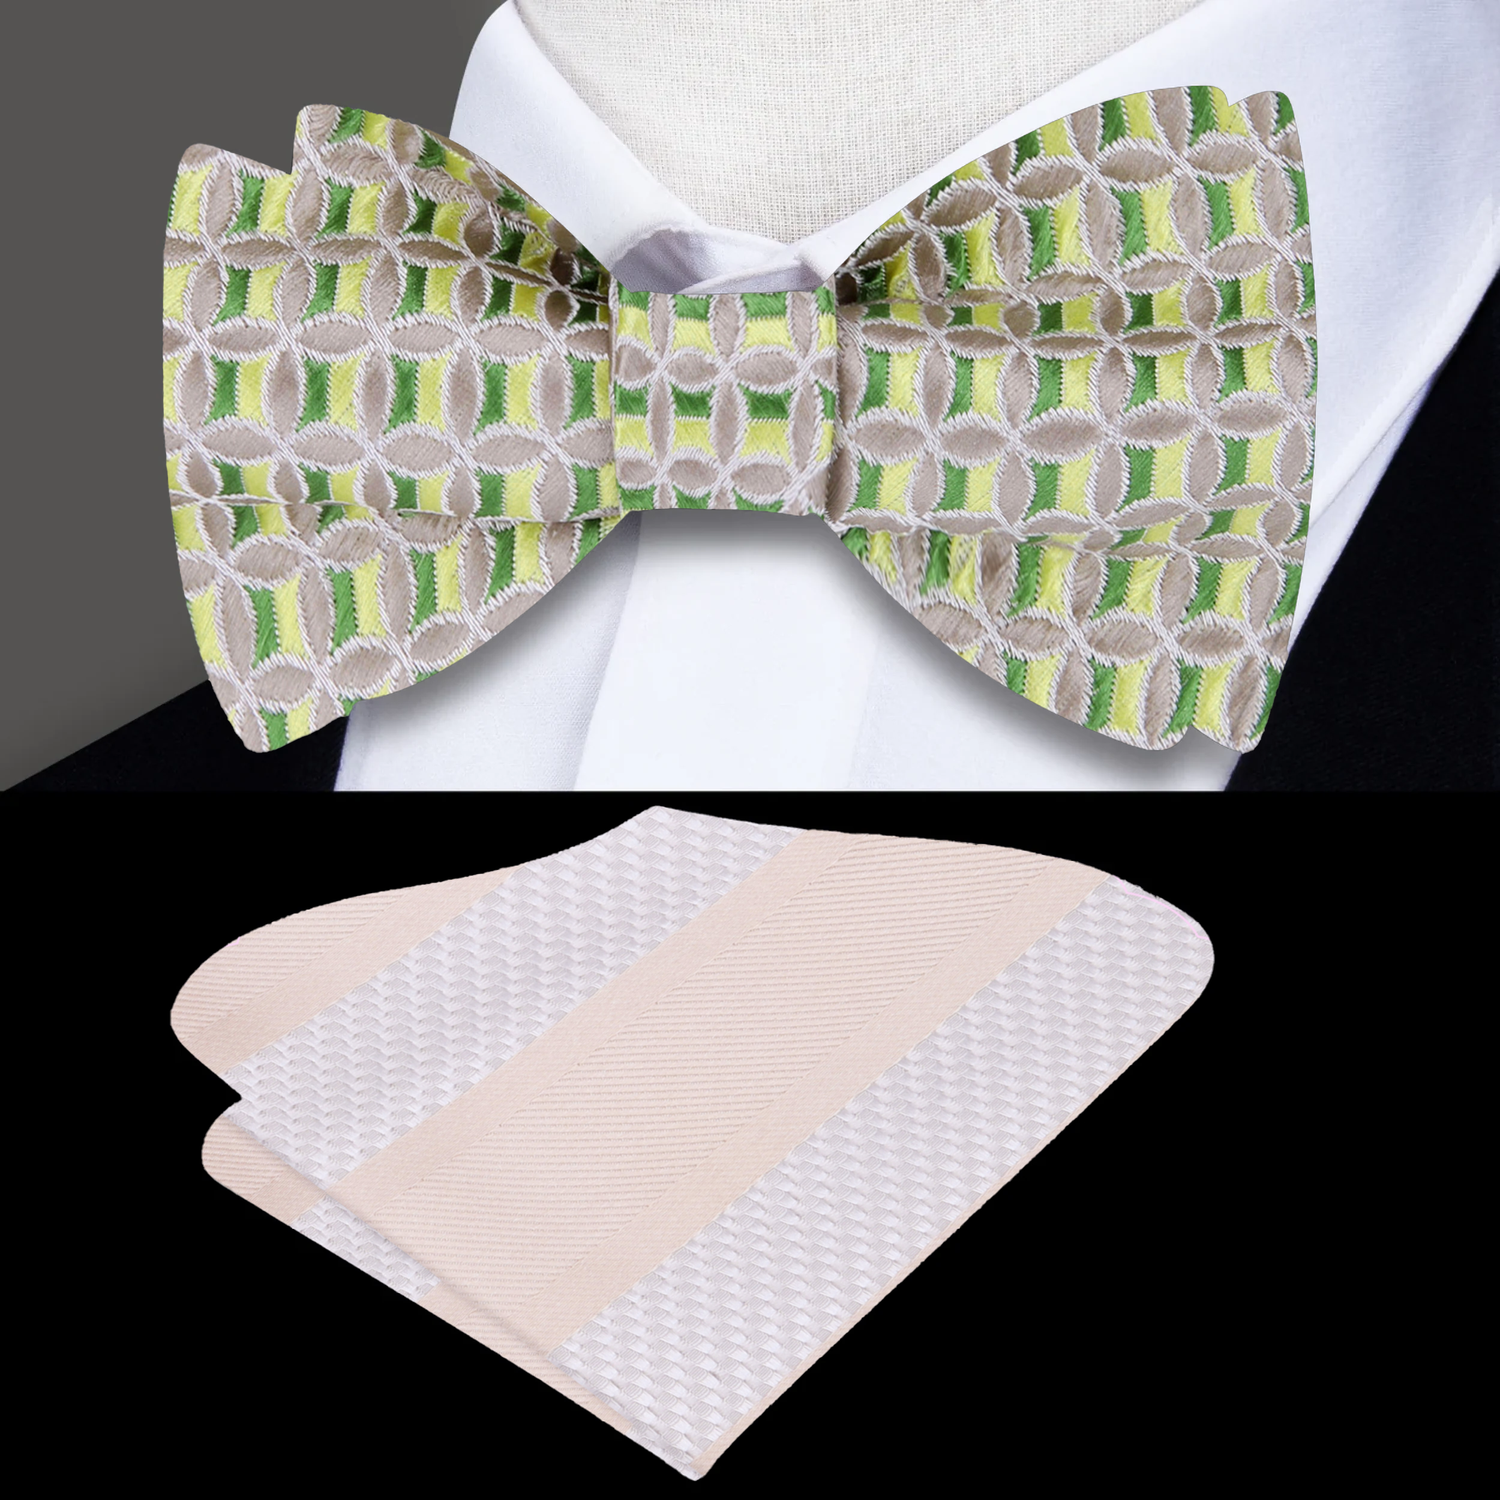 A Green, Light Green Geometric Pattern Silk Self Tie Bow Tie, Accenting Pocket Square